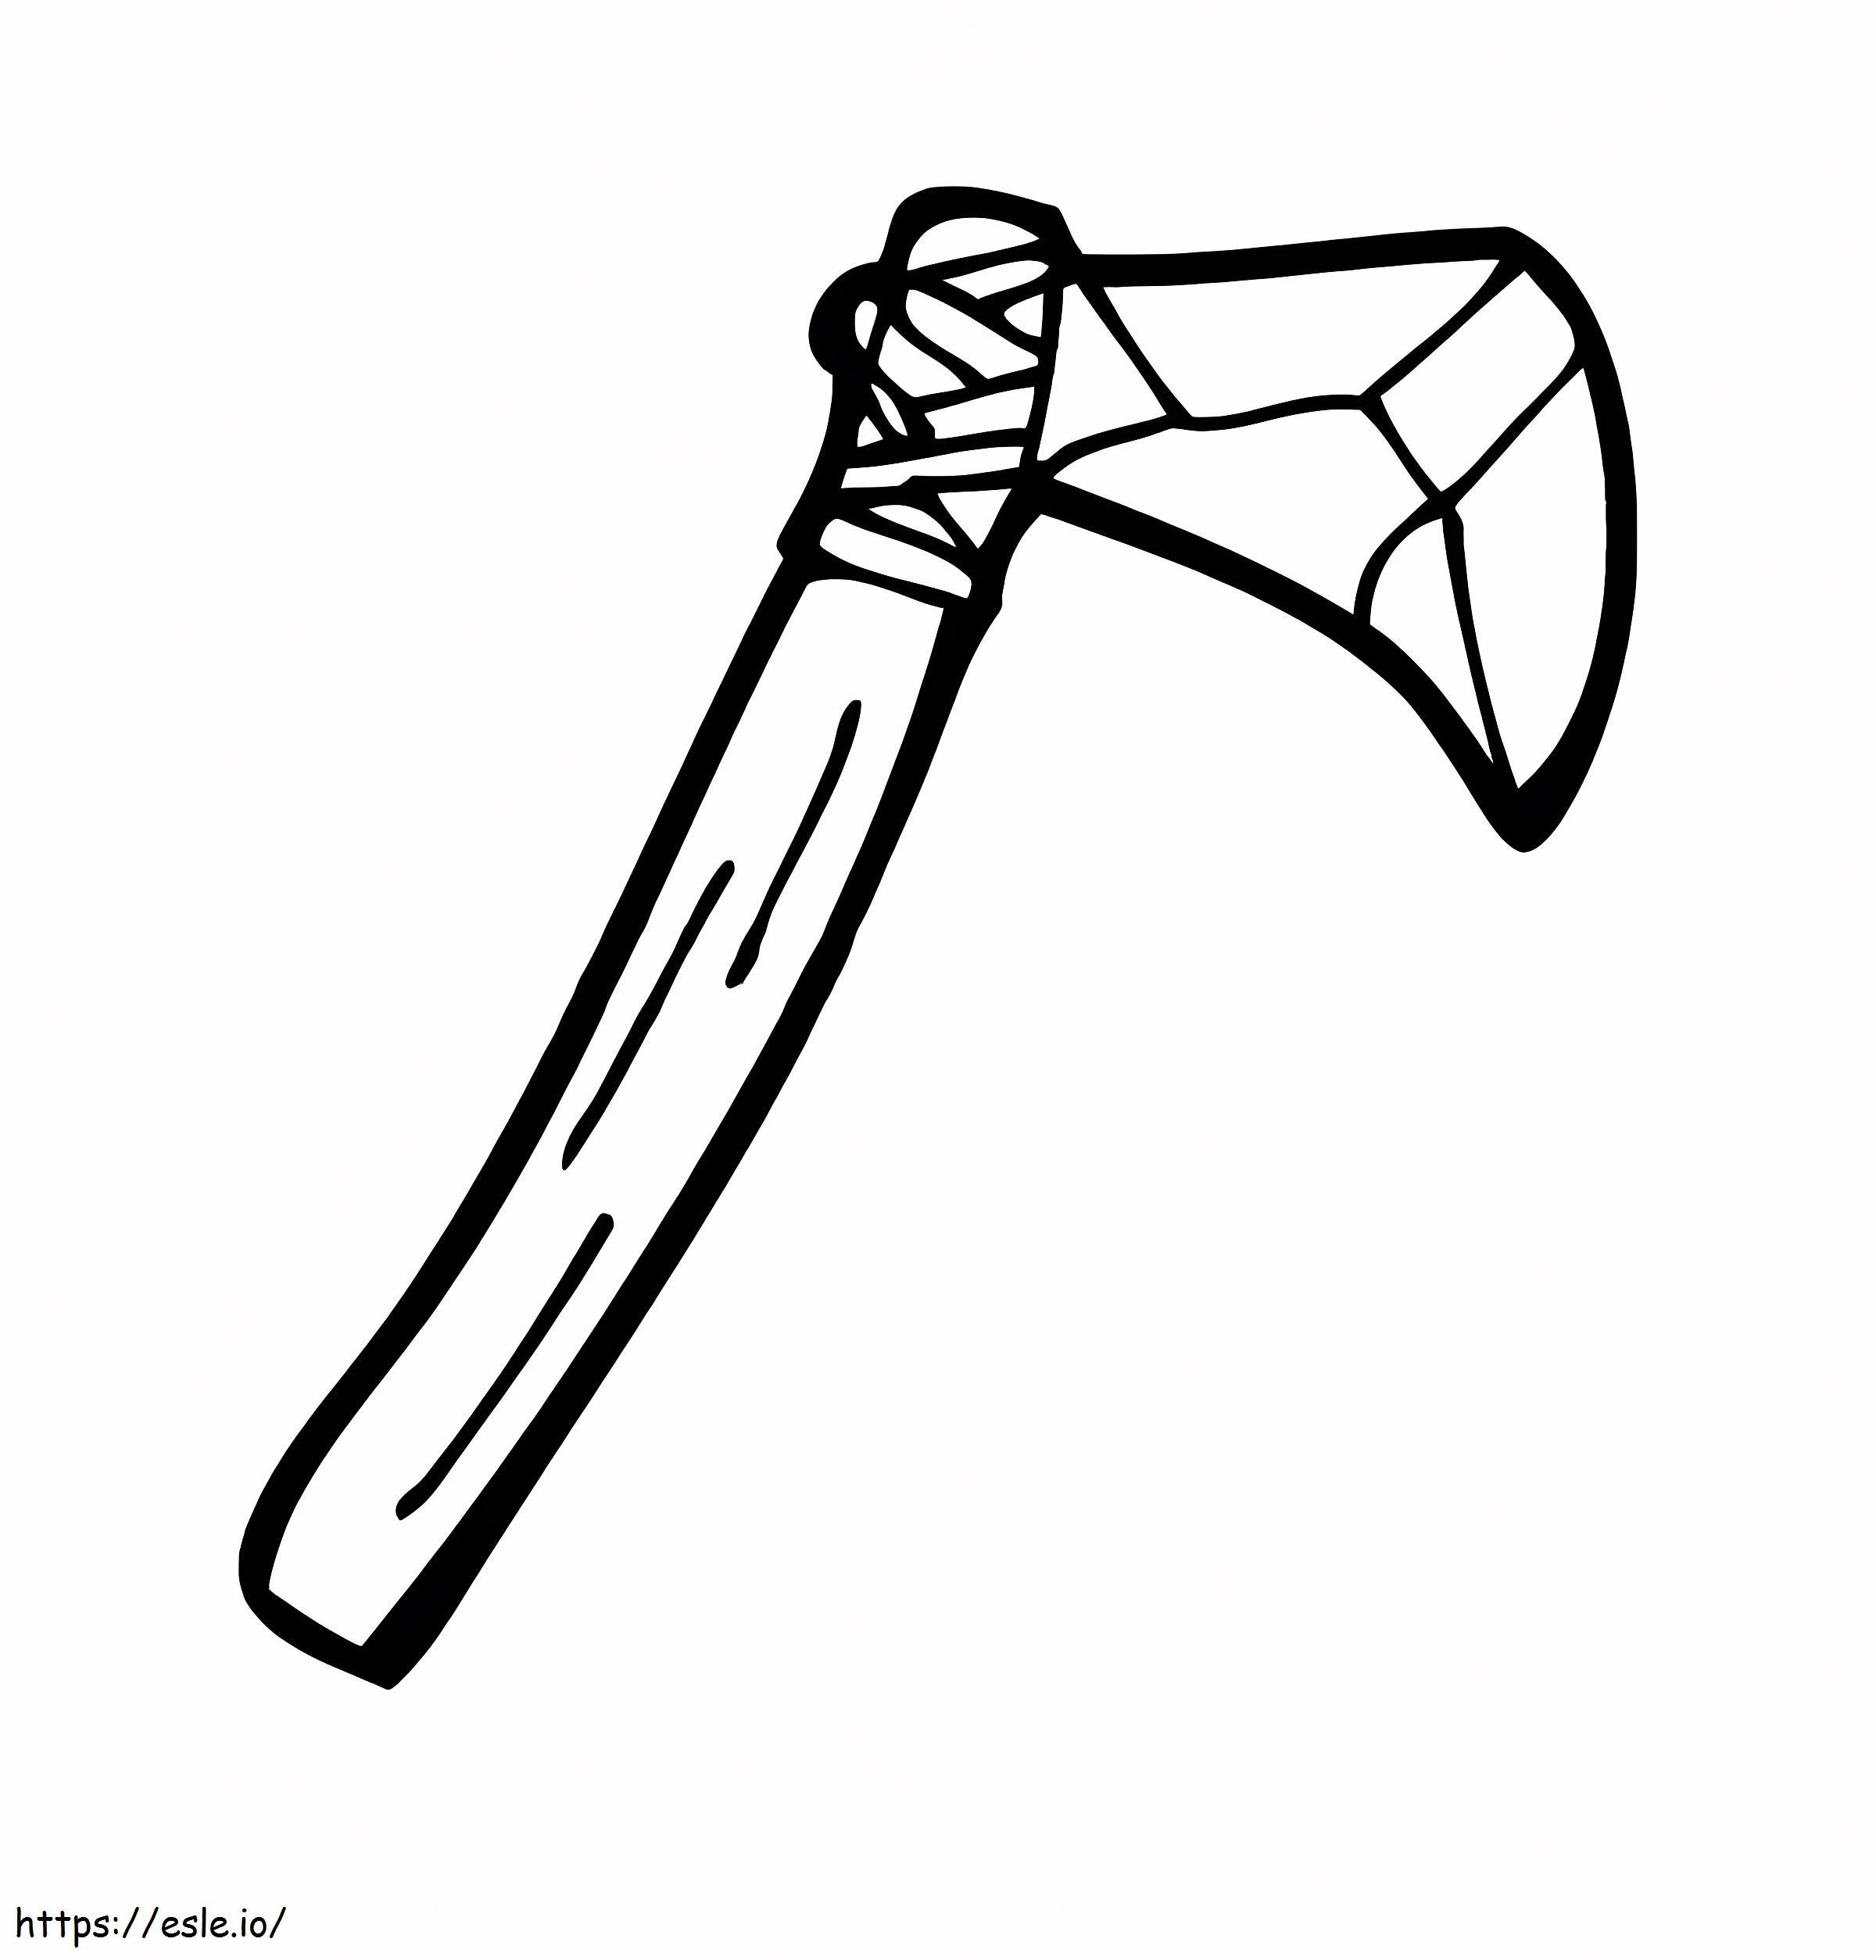 Stone Age Ax coloring page